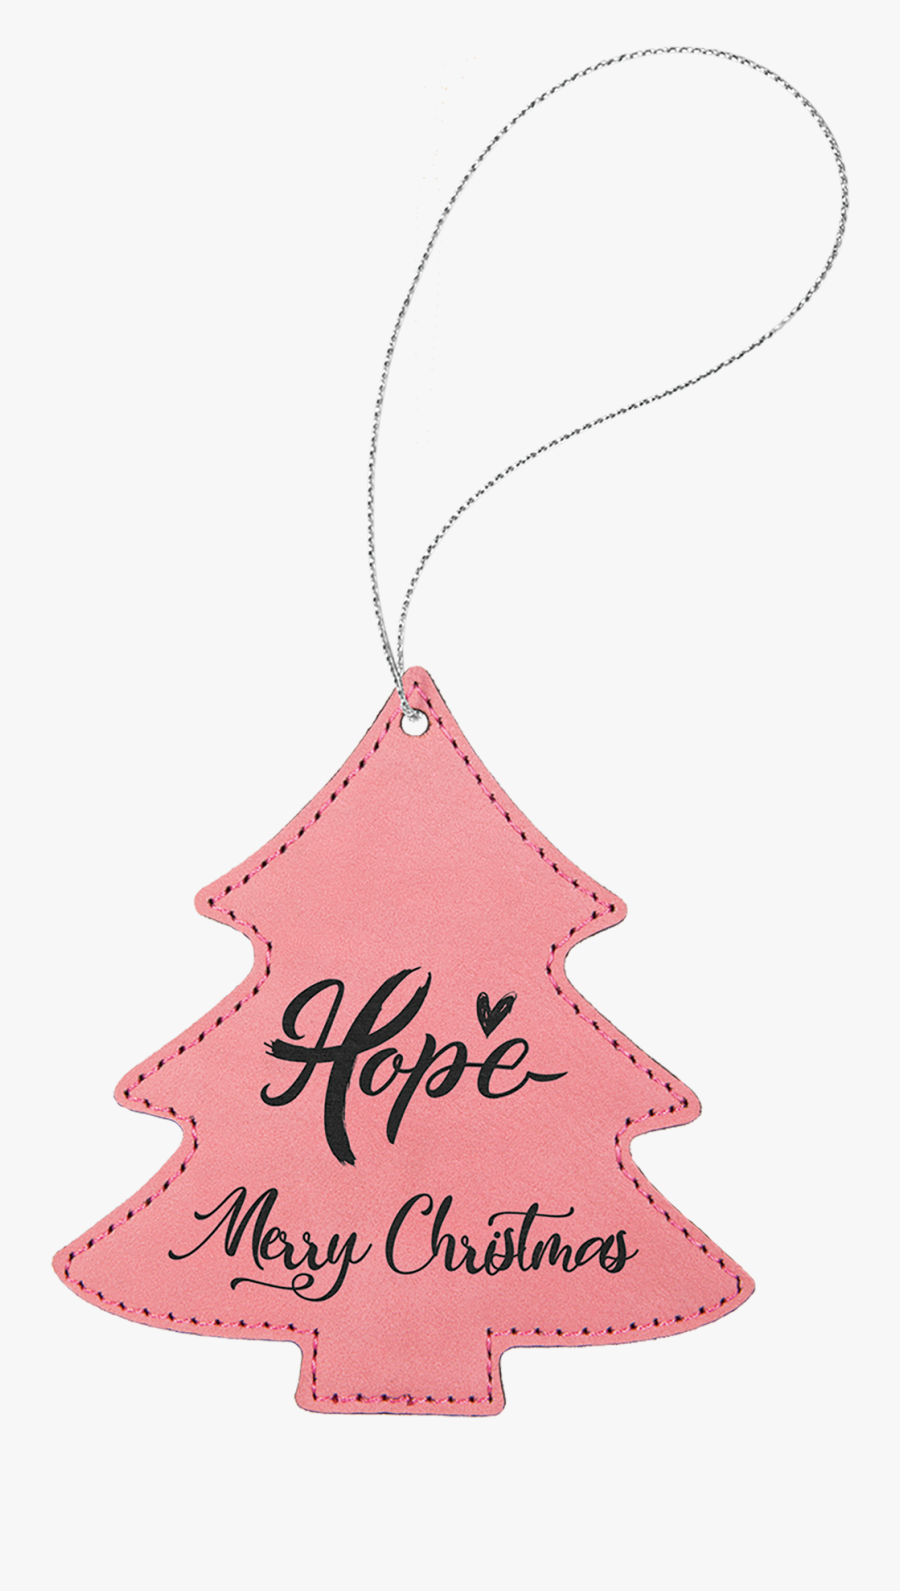 Leather Christmas Tree Ornaments, Transparent Clipart